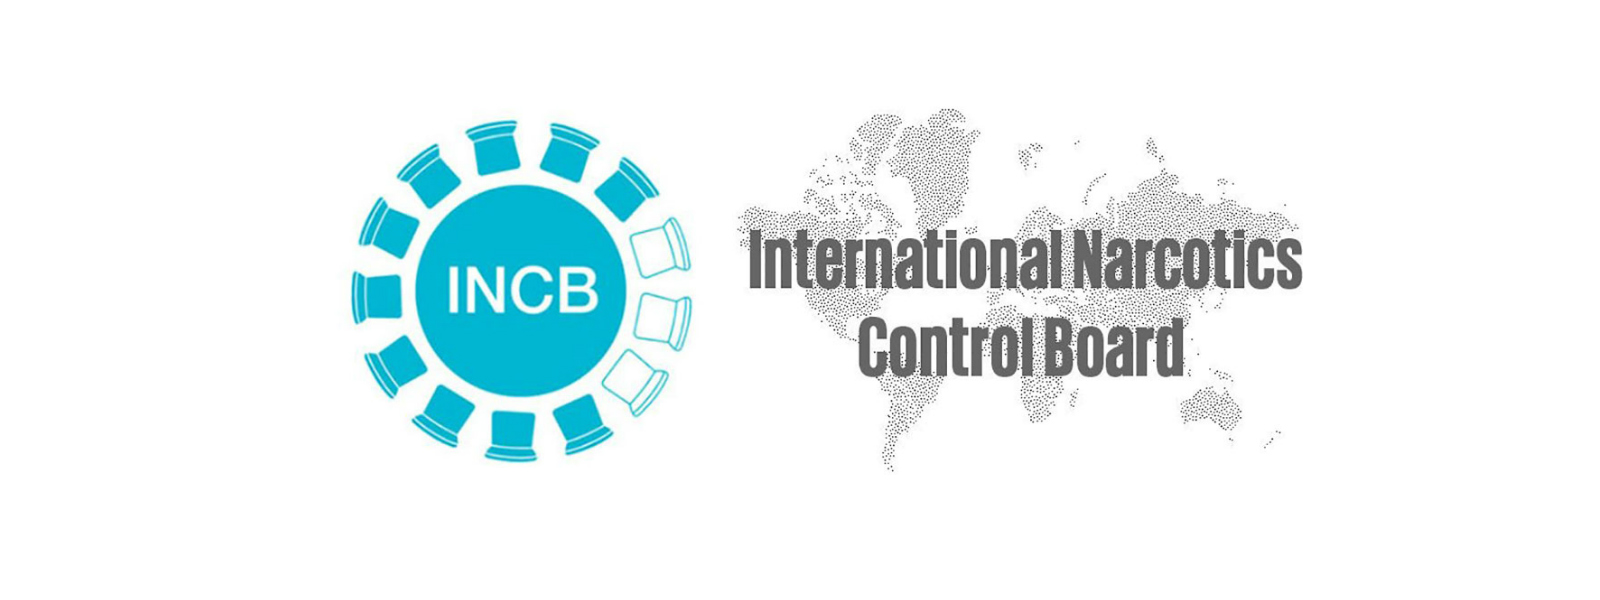 Officers of INCB to arrive in Sri Lanka